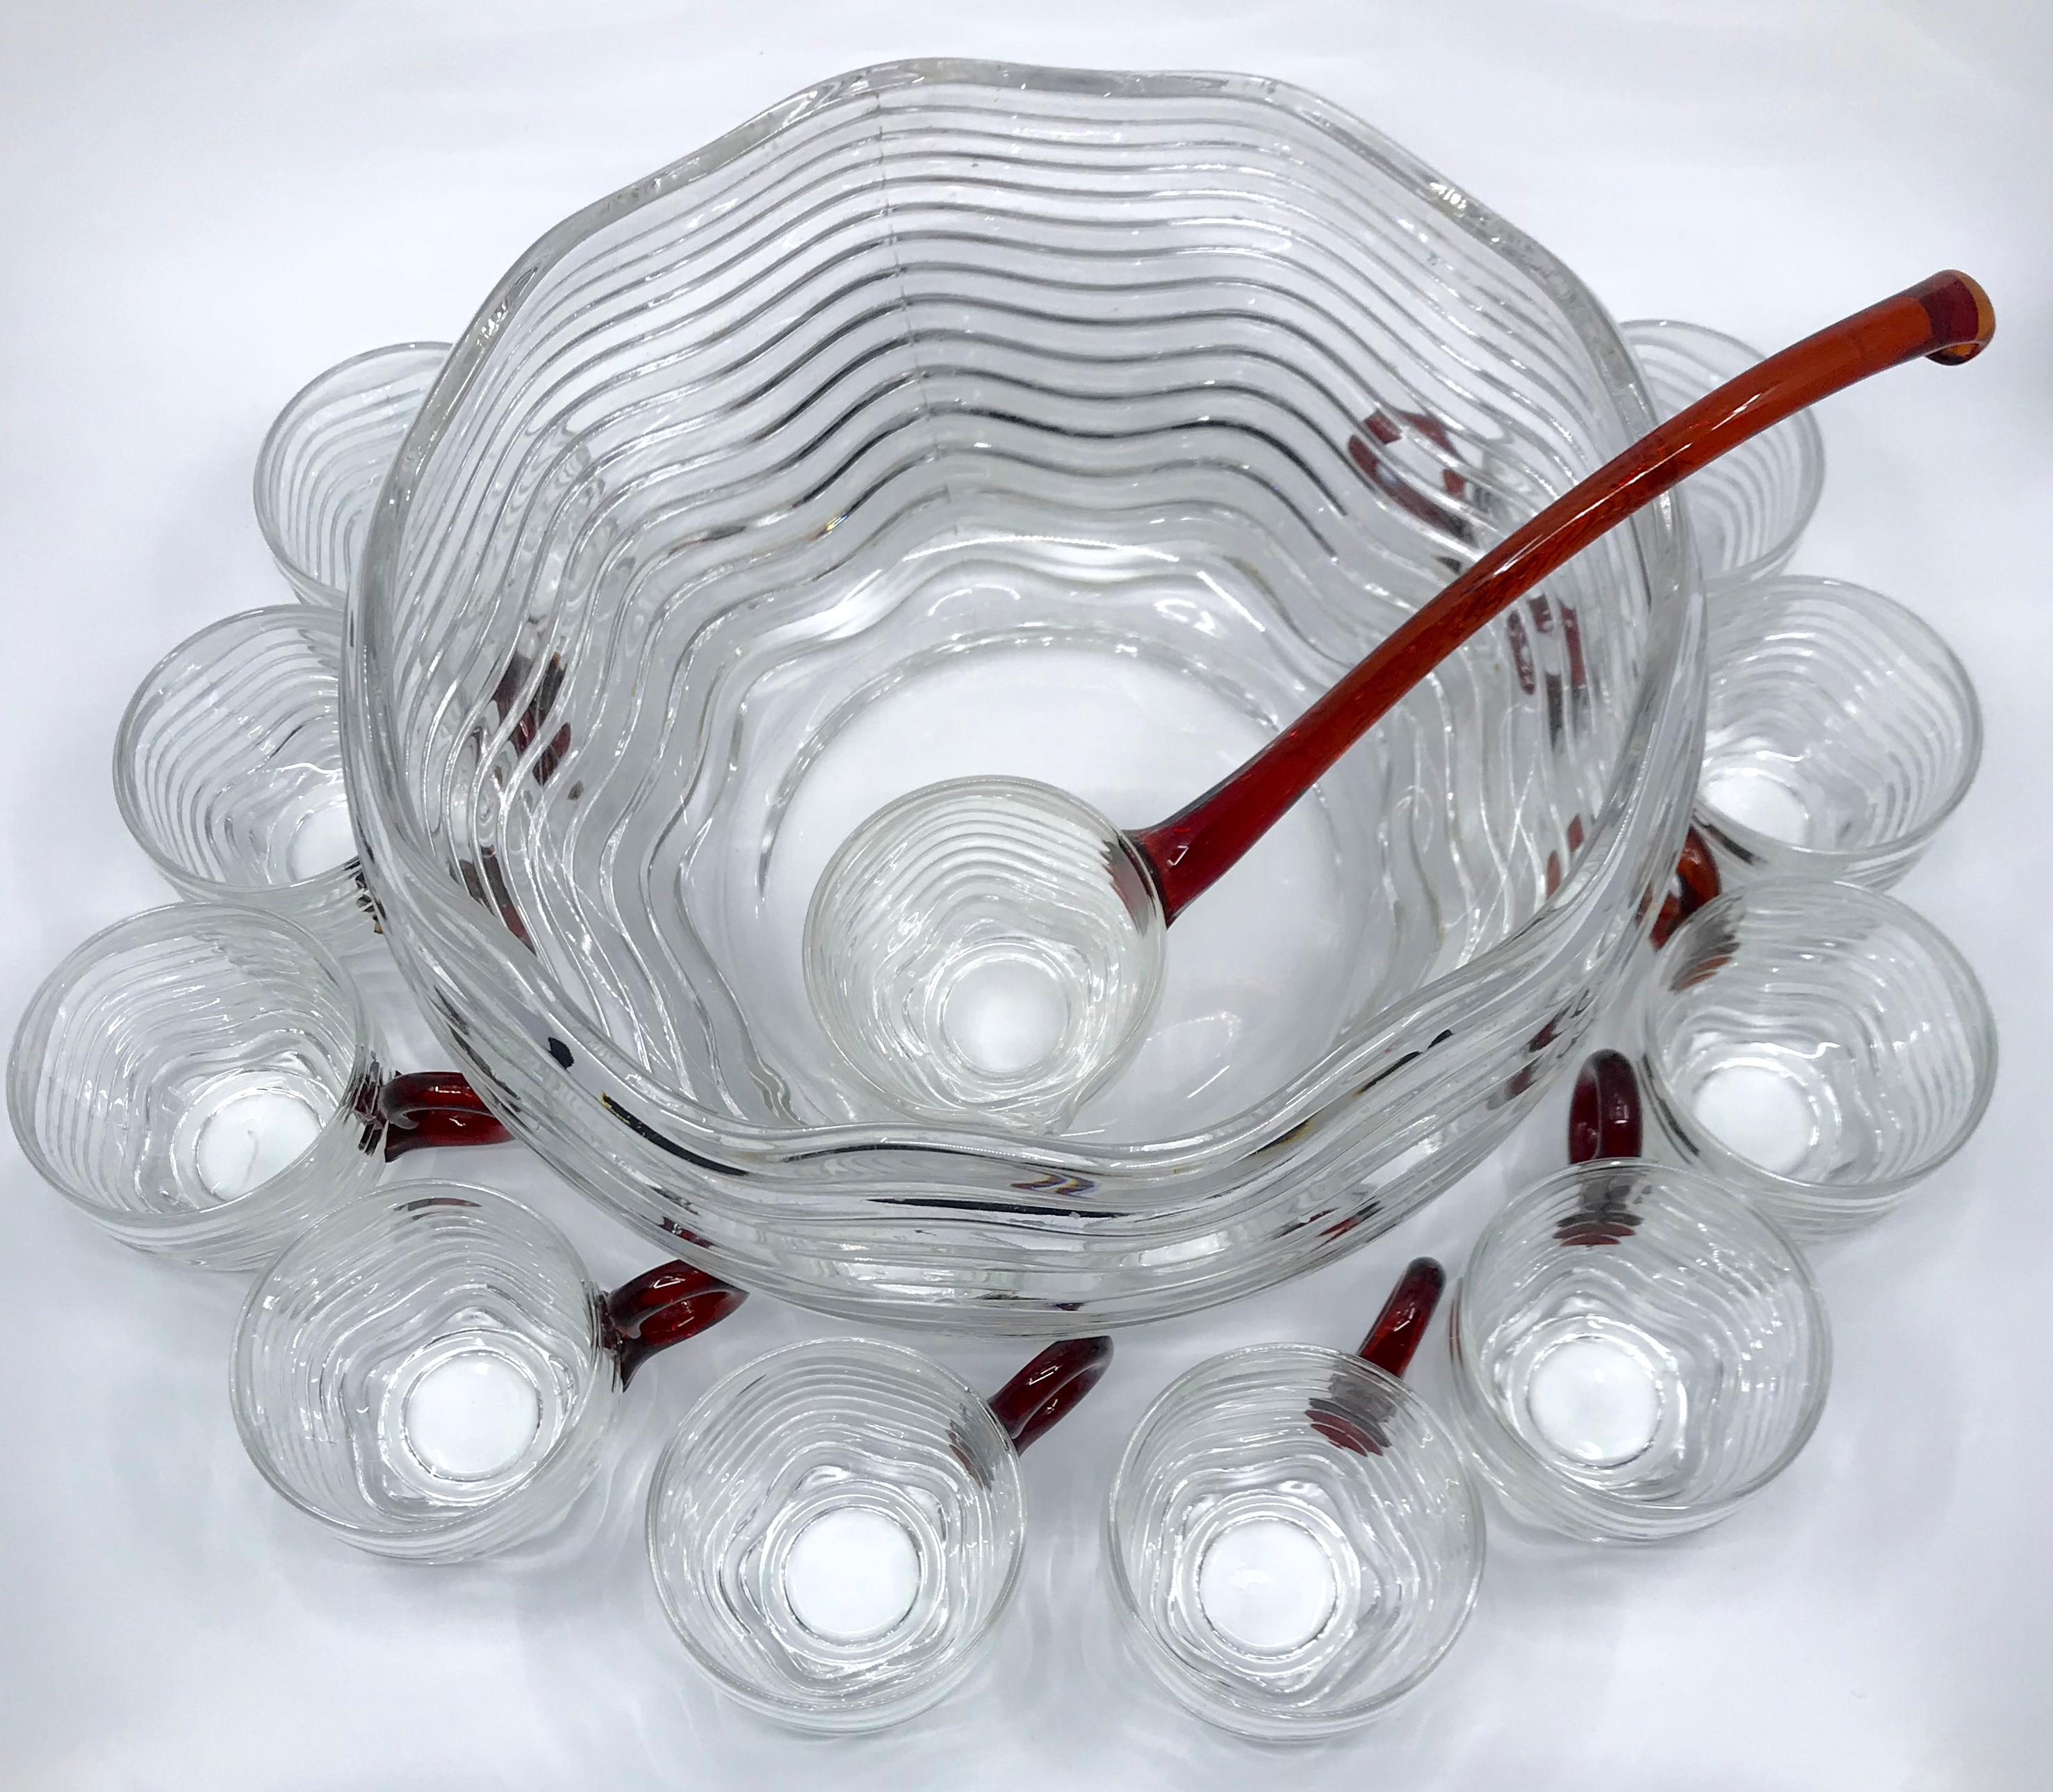 Thirties valentine red and clear glass deco punch bowl set. Rippled heavy American glass bowl with matching ladle and ten cups with garnet red glass handles. United States, circa 1930s
Dimensions: 
Bowl 10